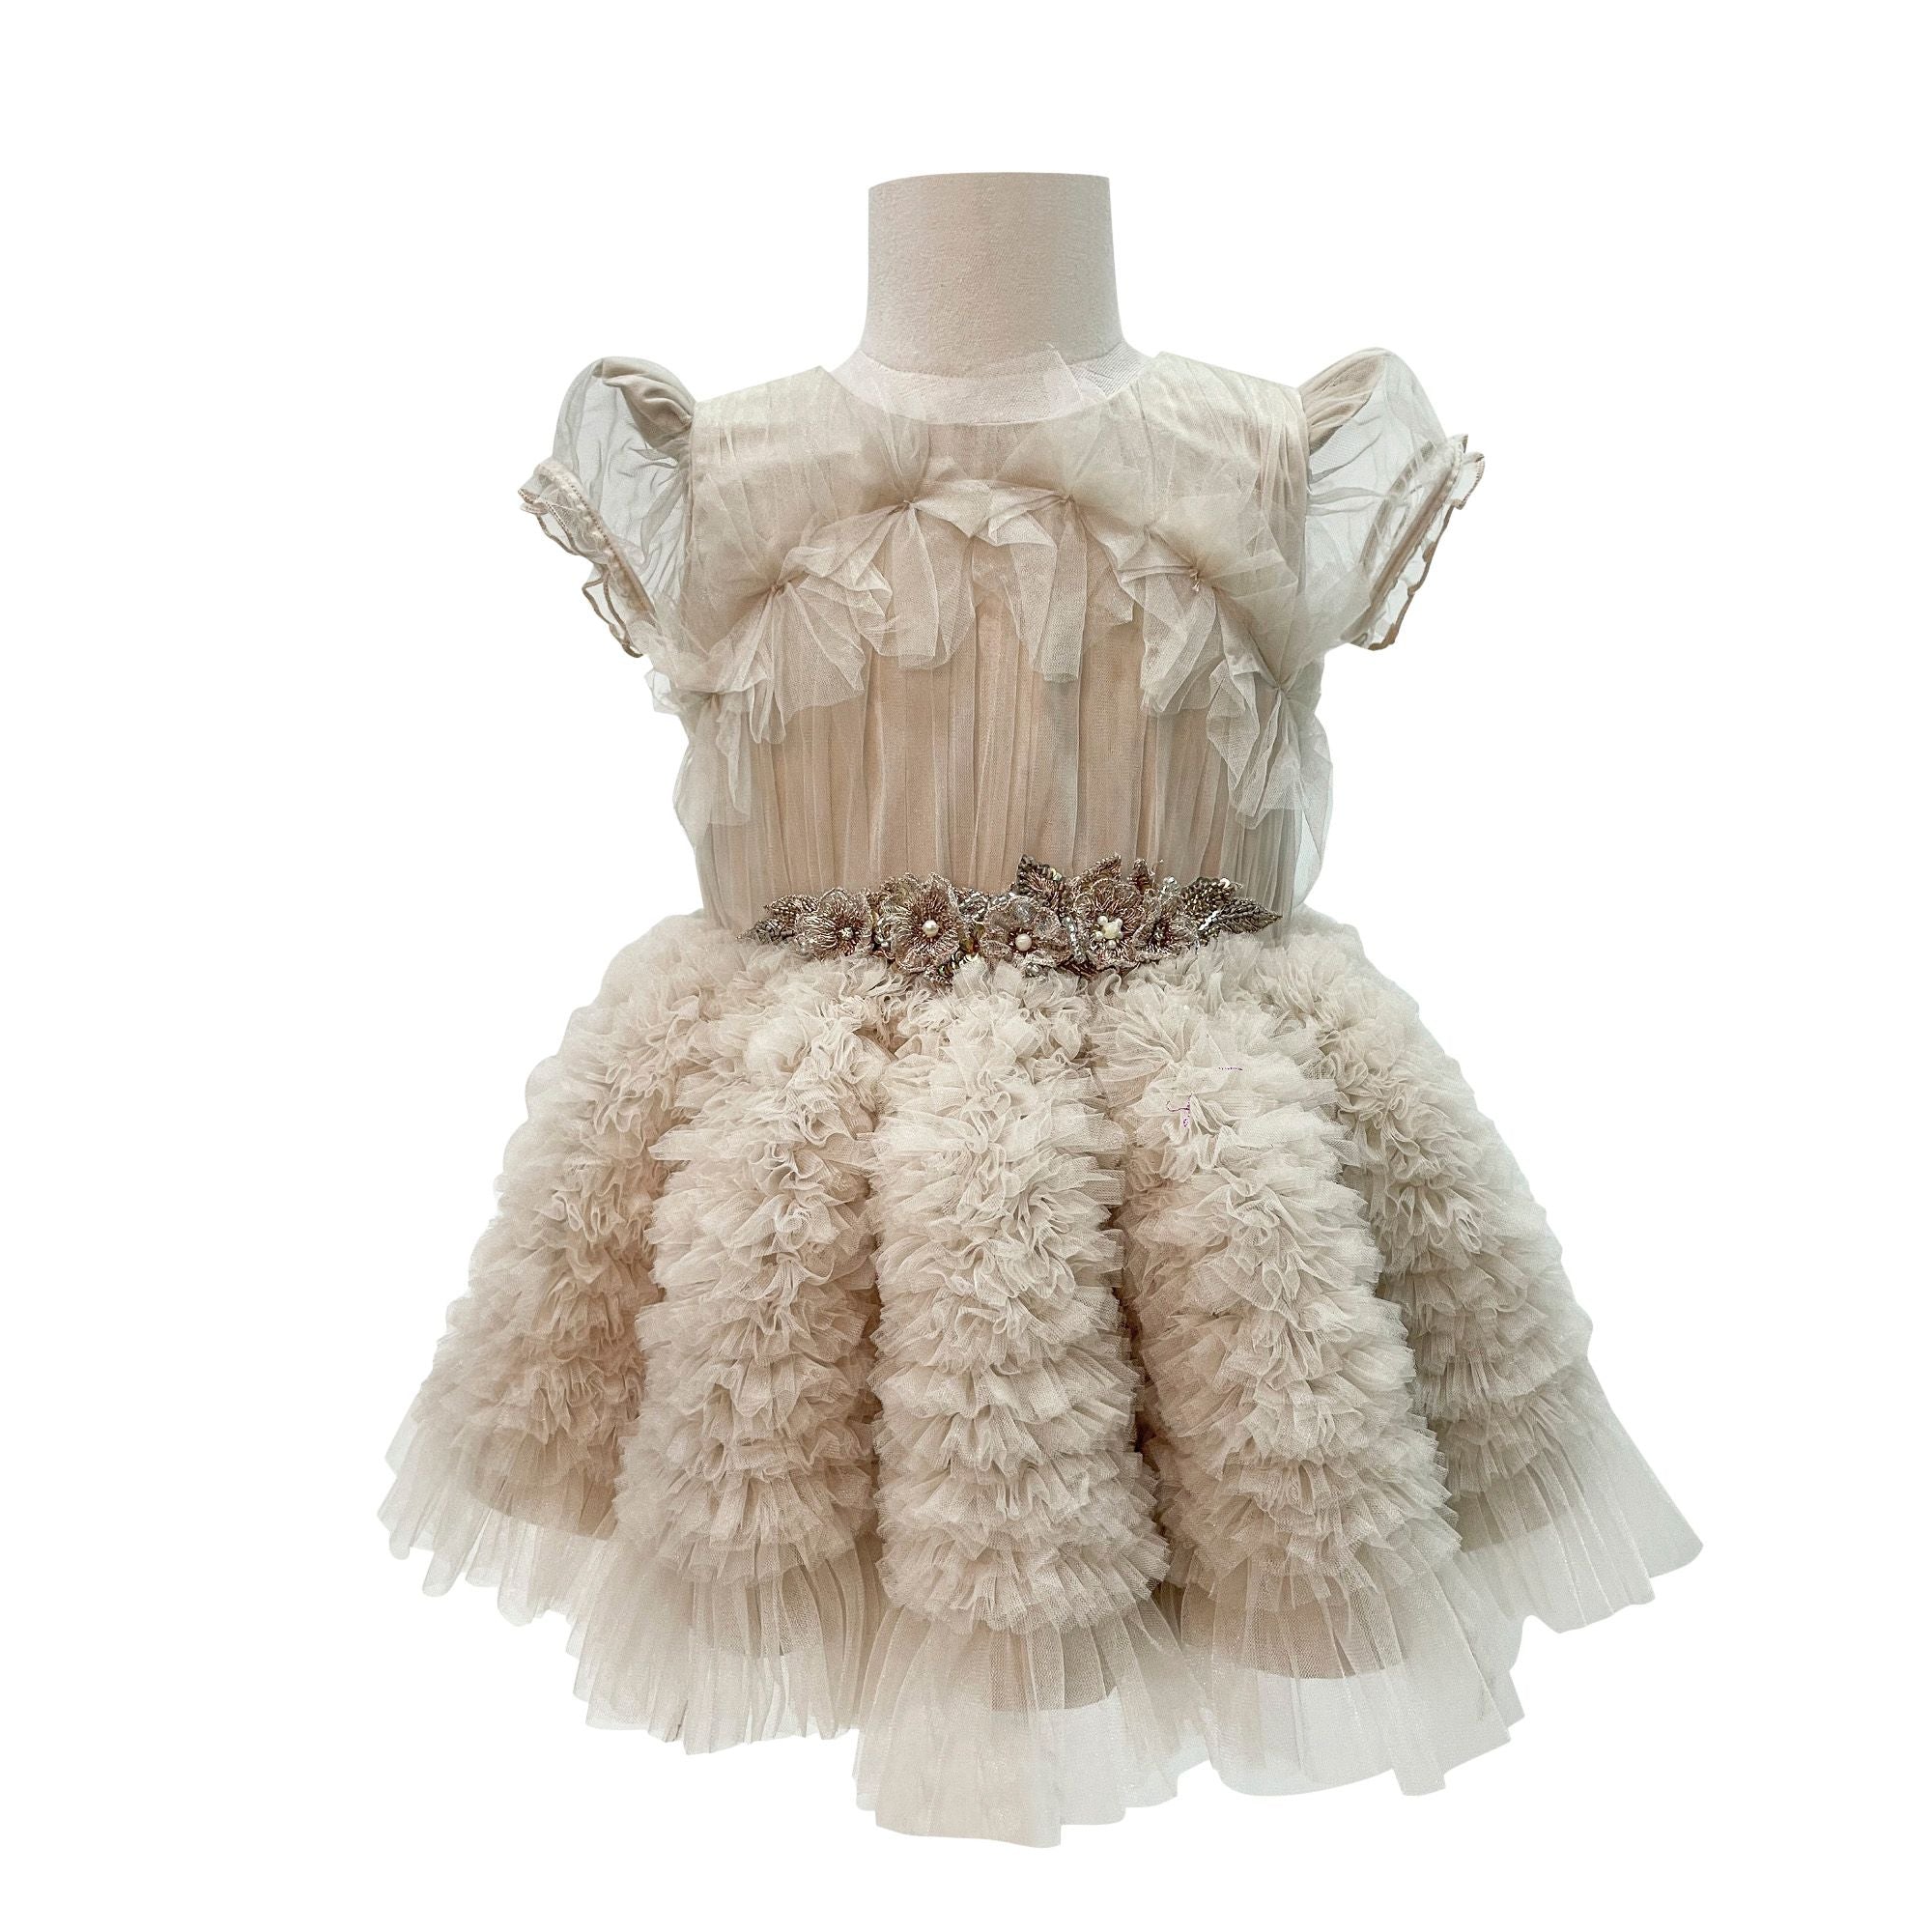 The Embellished Ariel Tulle Dress with Sleeves (Peach)